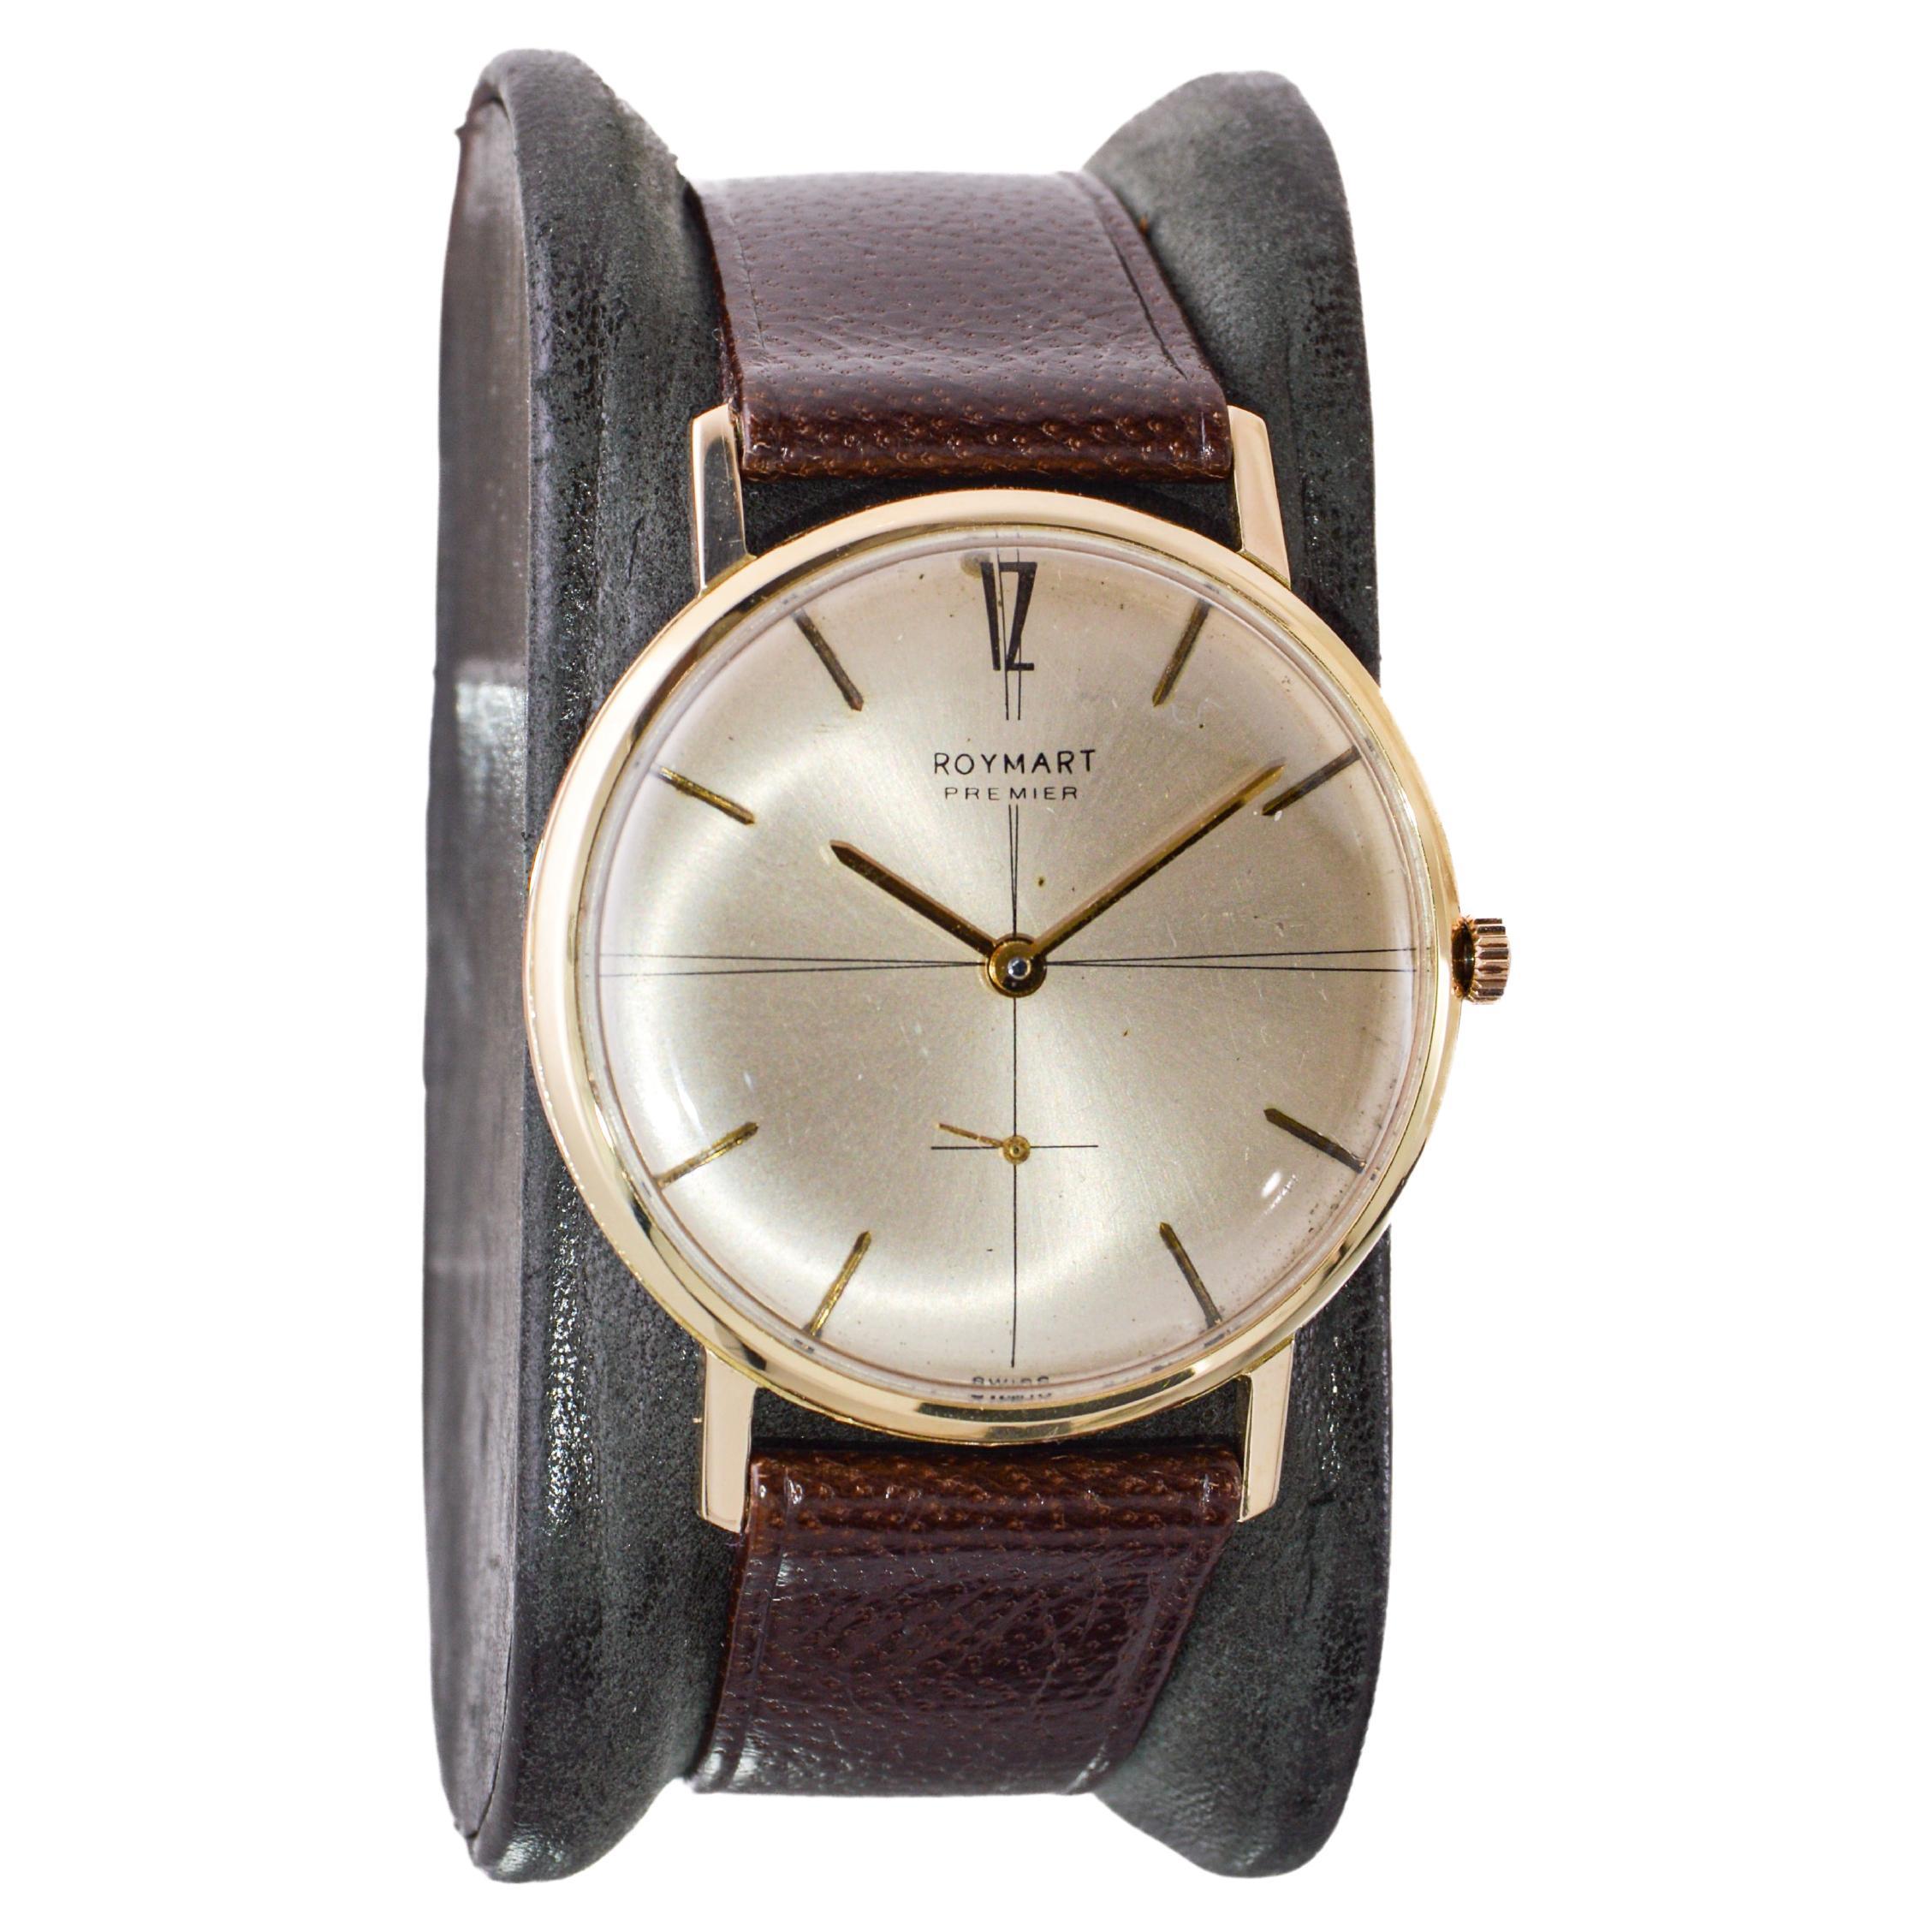 FACTORY / HOUSE: Alstater for Roymart Jewelers 
STYLE / REFERENCE: Dress Style / Round 
METAL / MATERIAL: 14Kt Solid Gold 
CIRCA / YEAR: 1950 / 60's
DIMENSIONS / SIZE: Length 40mm X Diameter 34mm
MOVEMENT / CALIBER: Manual Winding / 17 Jewels /